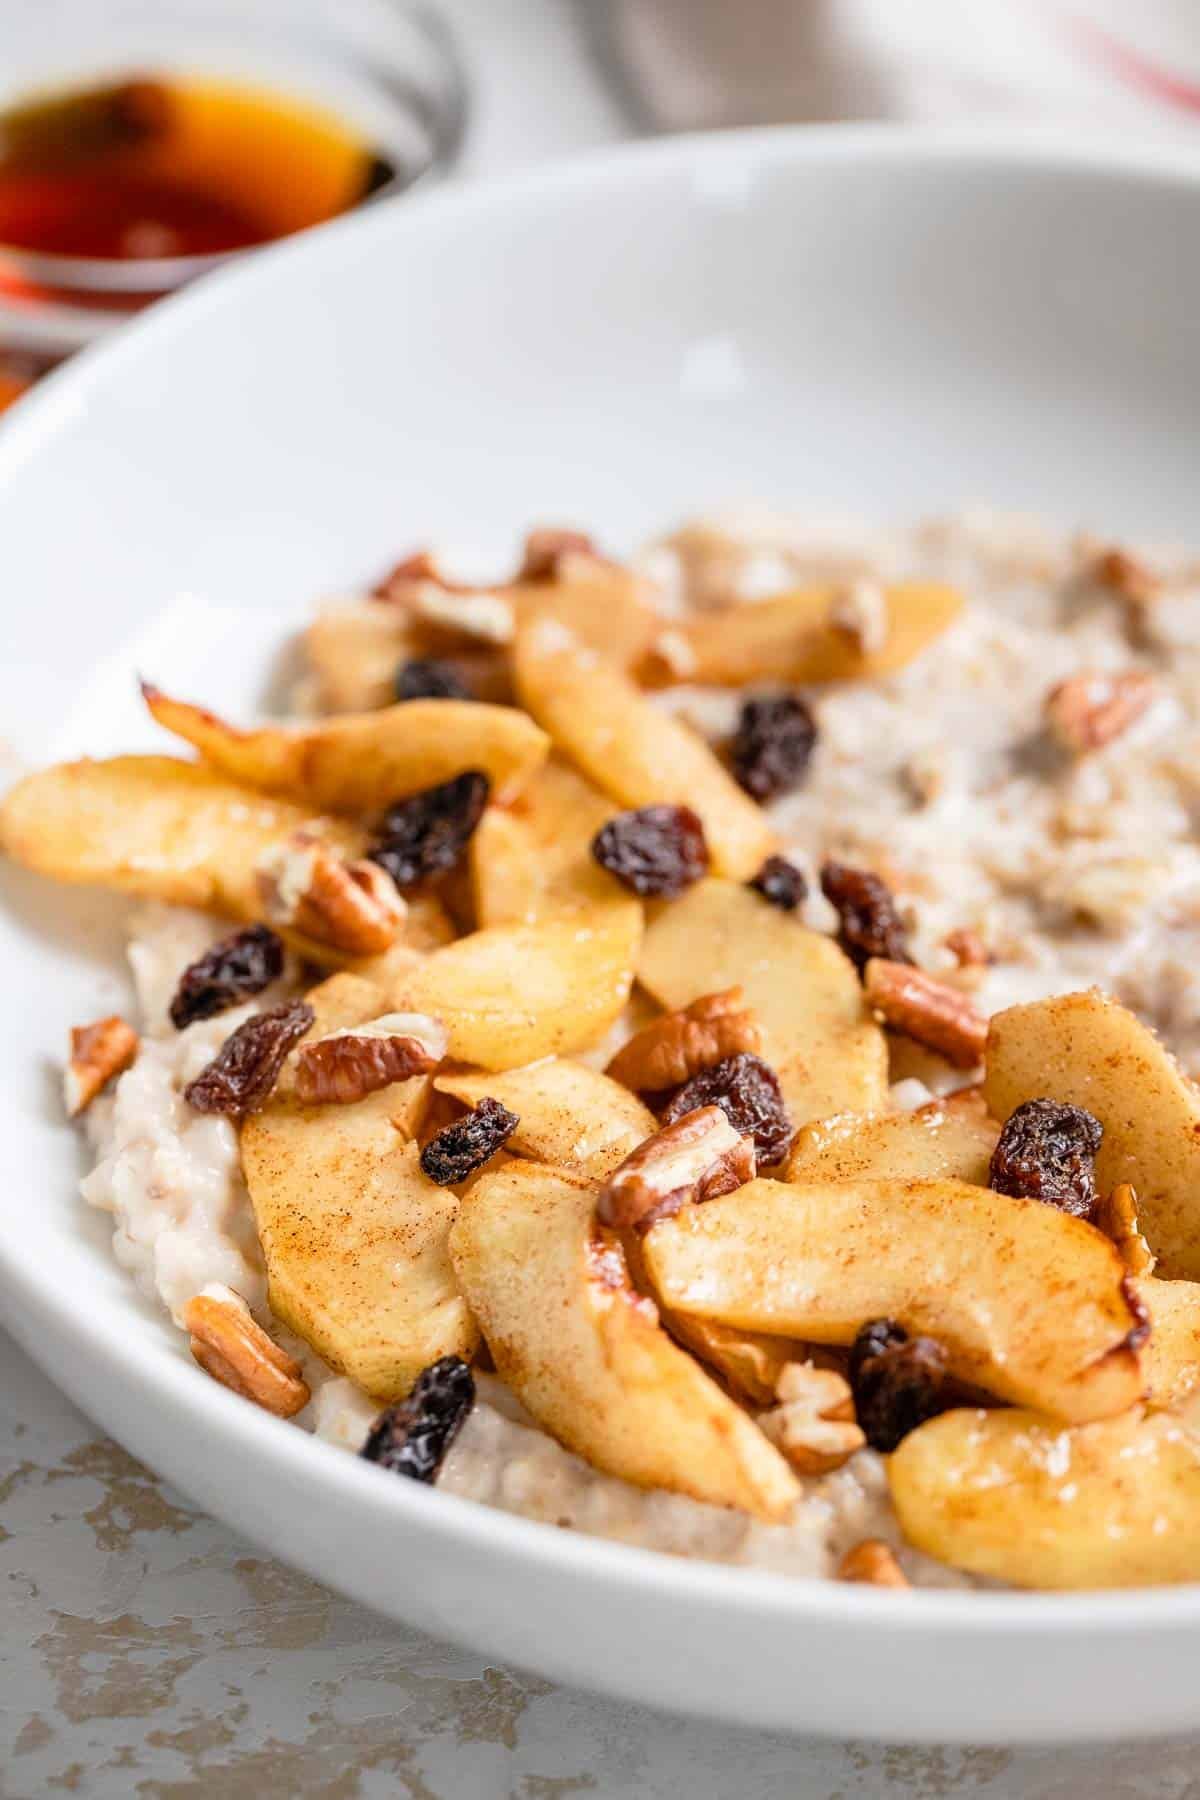 Oatmeal with apples and pecans.